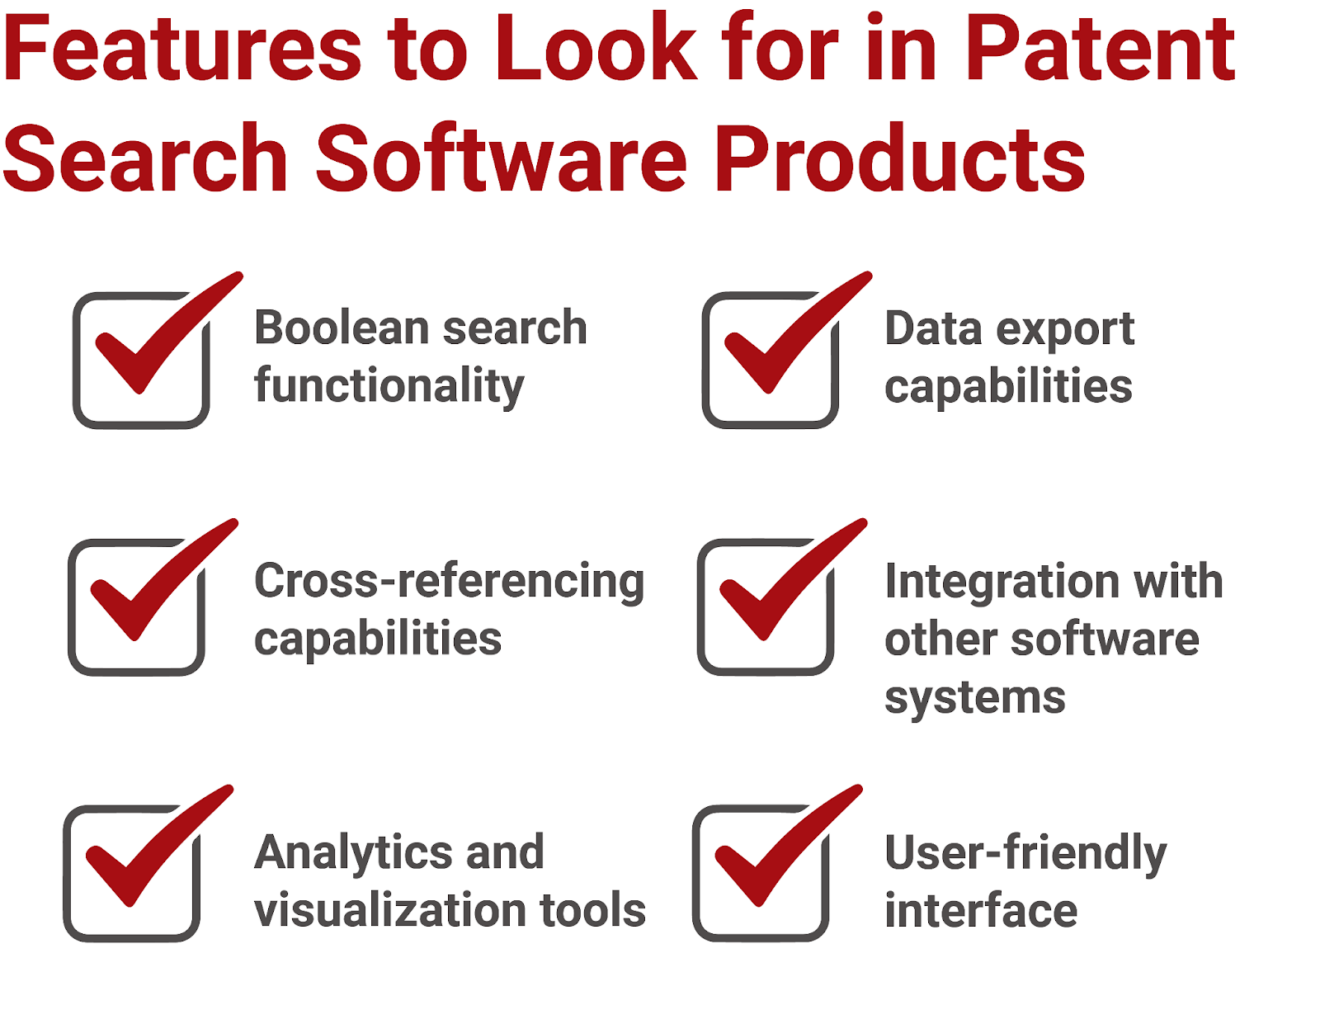 Features to Look for in Patent Search Software Products